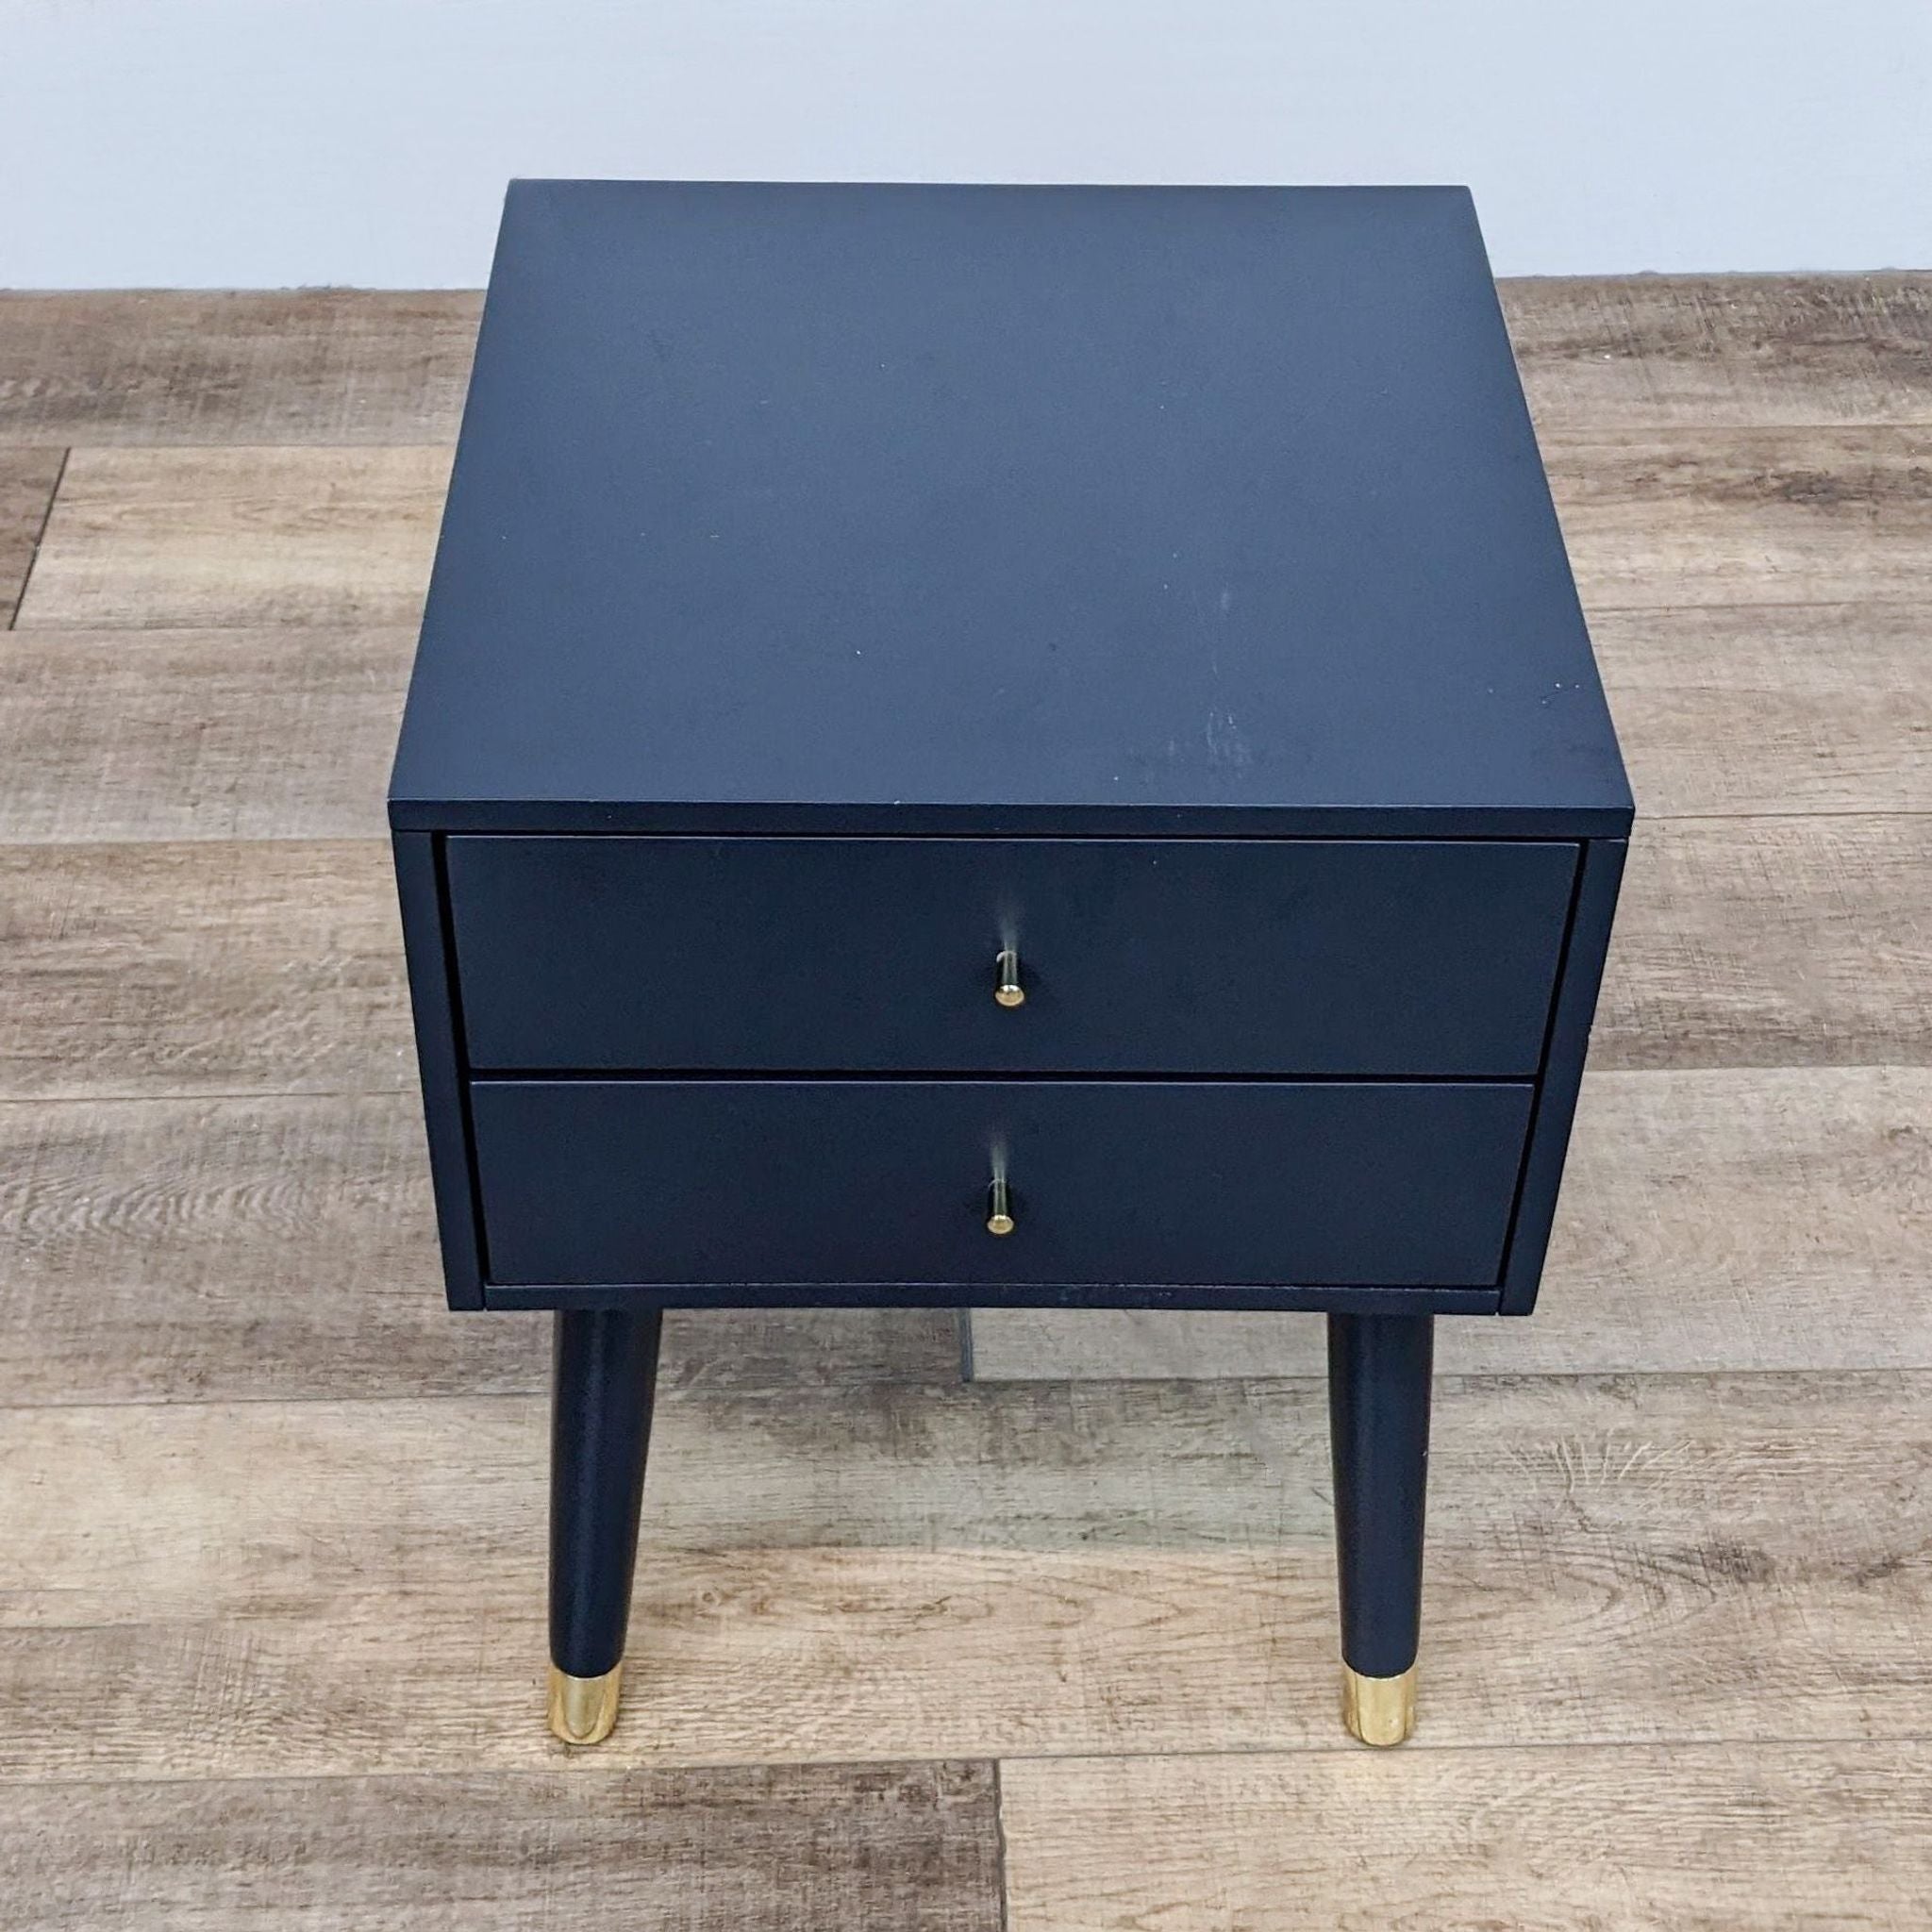 Safavieh end table with two drawers and angled legs with metallic caps on a wooden floor.